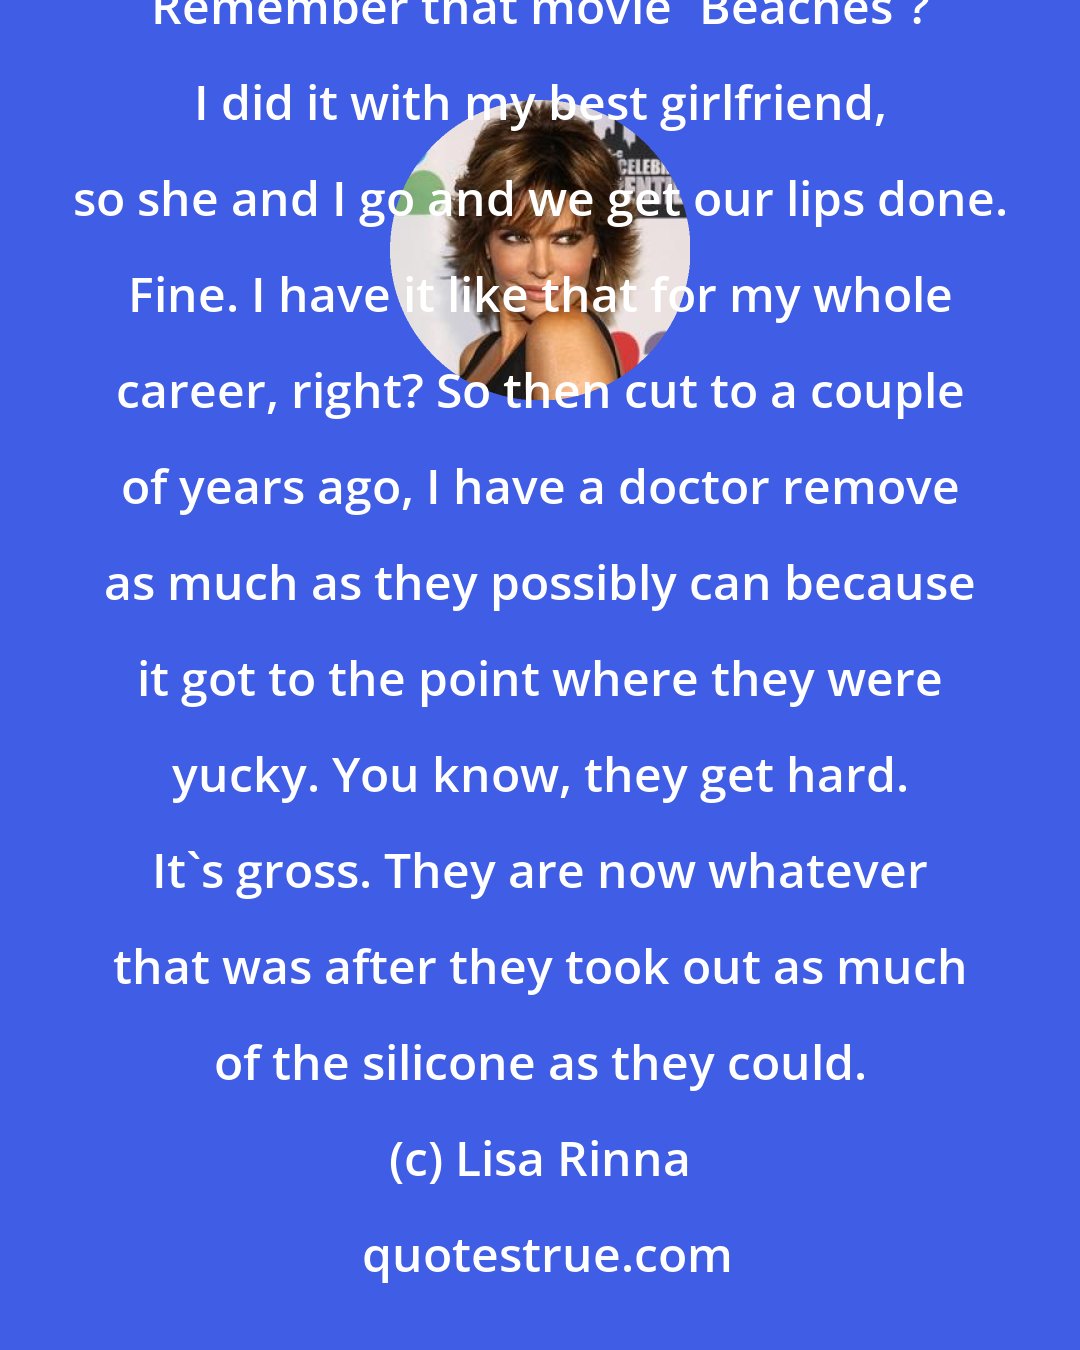 Lisa Rinna: Here's the story: 25 years ago, I had my lips injected with silicone. Stupid thing to do at 24. I saw 'Beaches.' Remember that movie 'Beaches'? I did it with my best girlfriend, so she and I go and we get our lips done. Fine. I have it like that for my whole career, right? So then cut to a couple of years ago, I have a doctor remove as much as they possibly can because it got to the point where they were yucky. You know, they get hard. It's gross. They are now whatever that was after they took out as much of the silicone as they could.